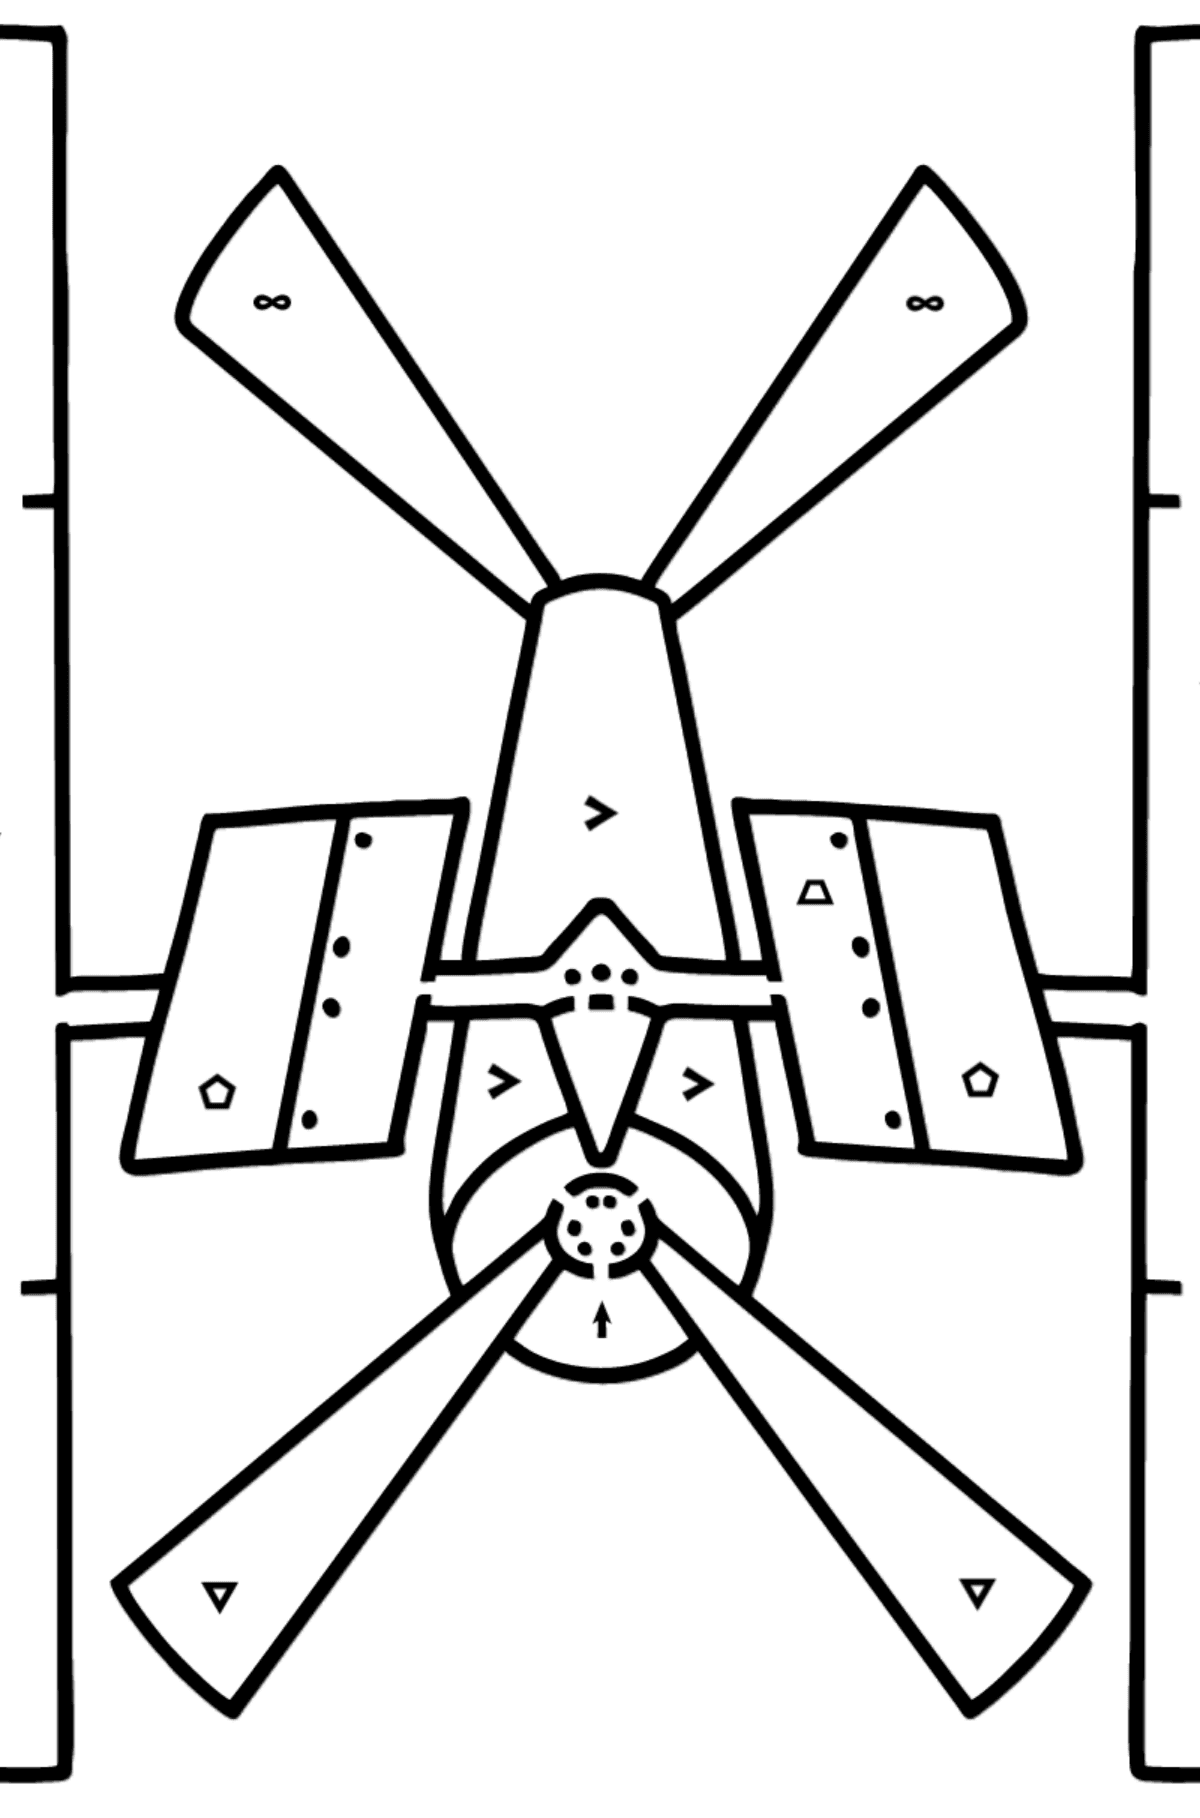 Space Station coloring page - Coloring by Symbols and Geometric Shapes for Kids